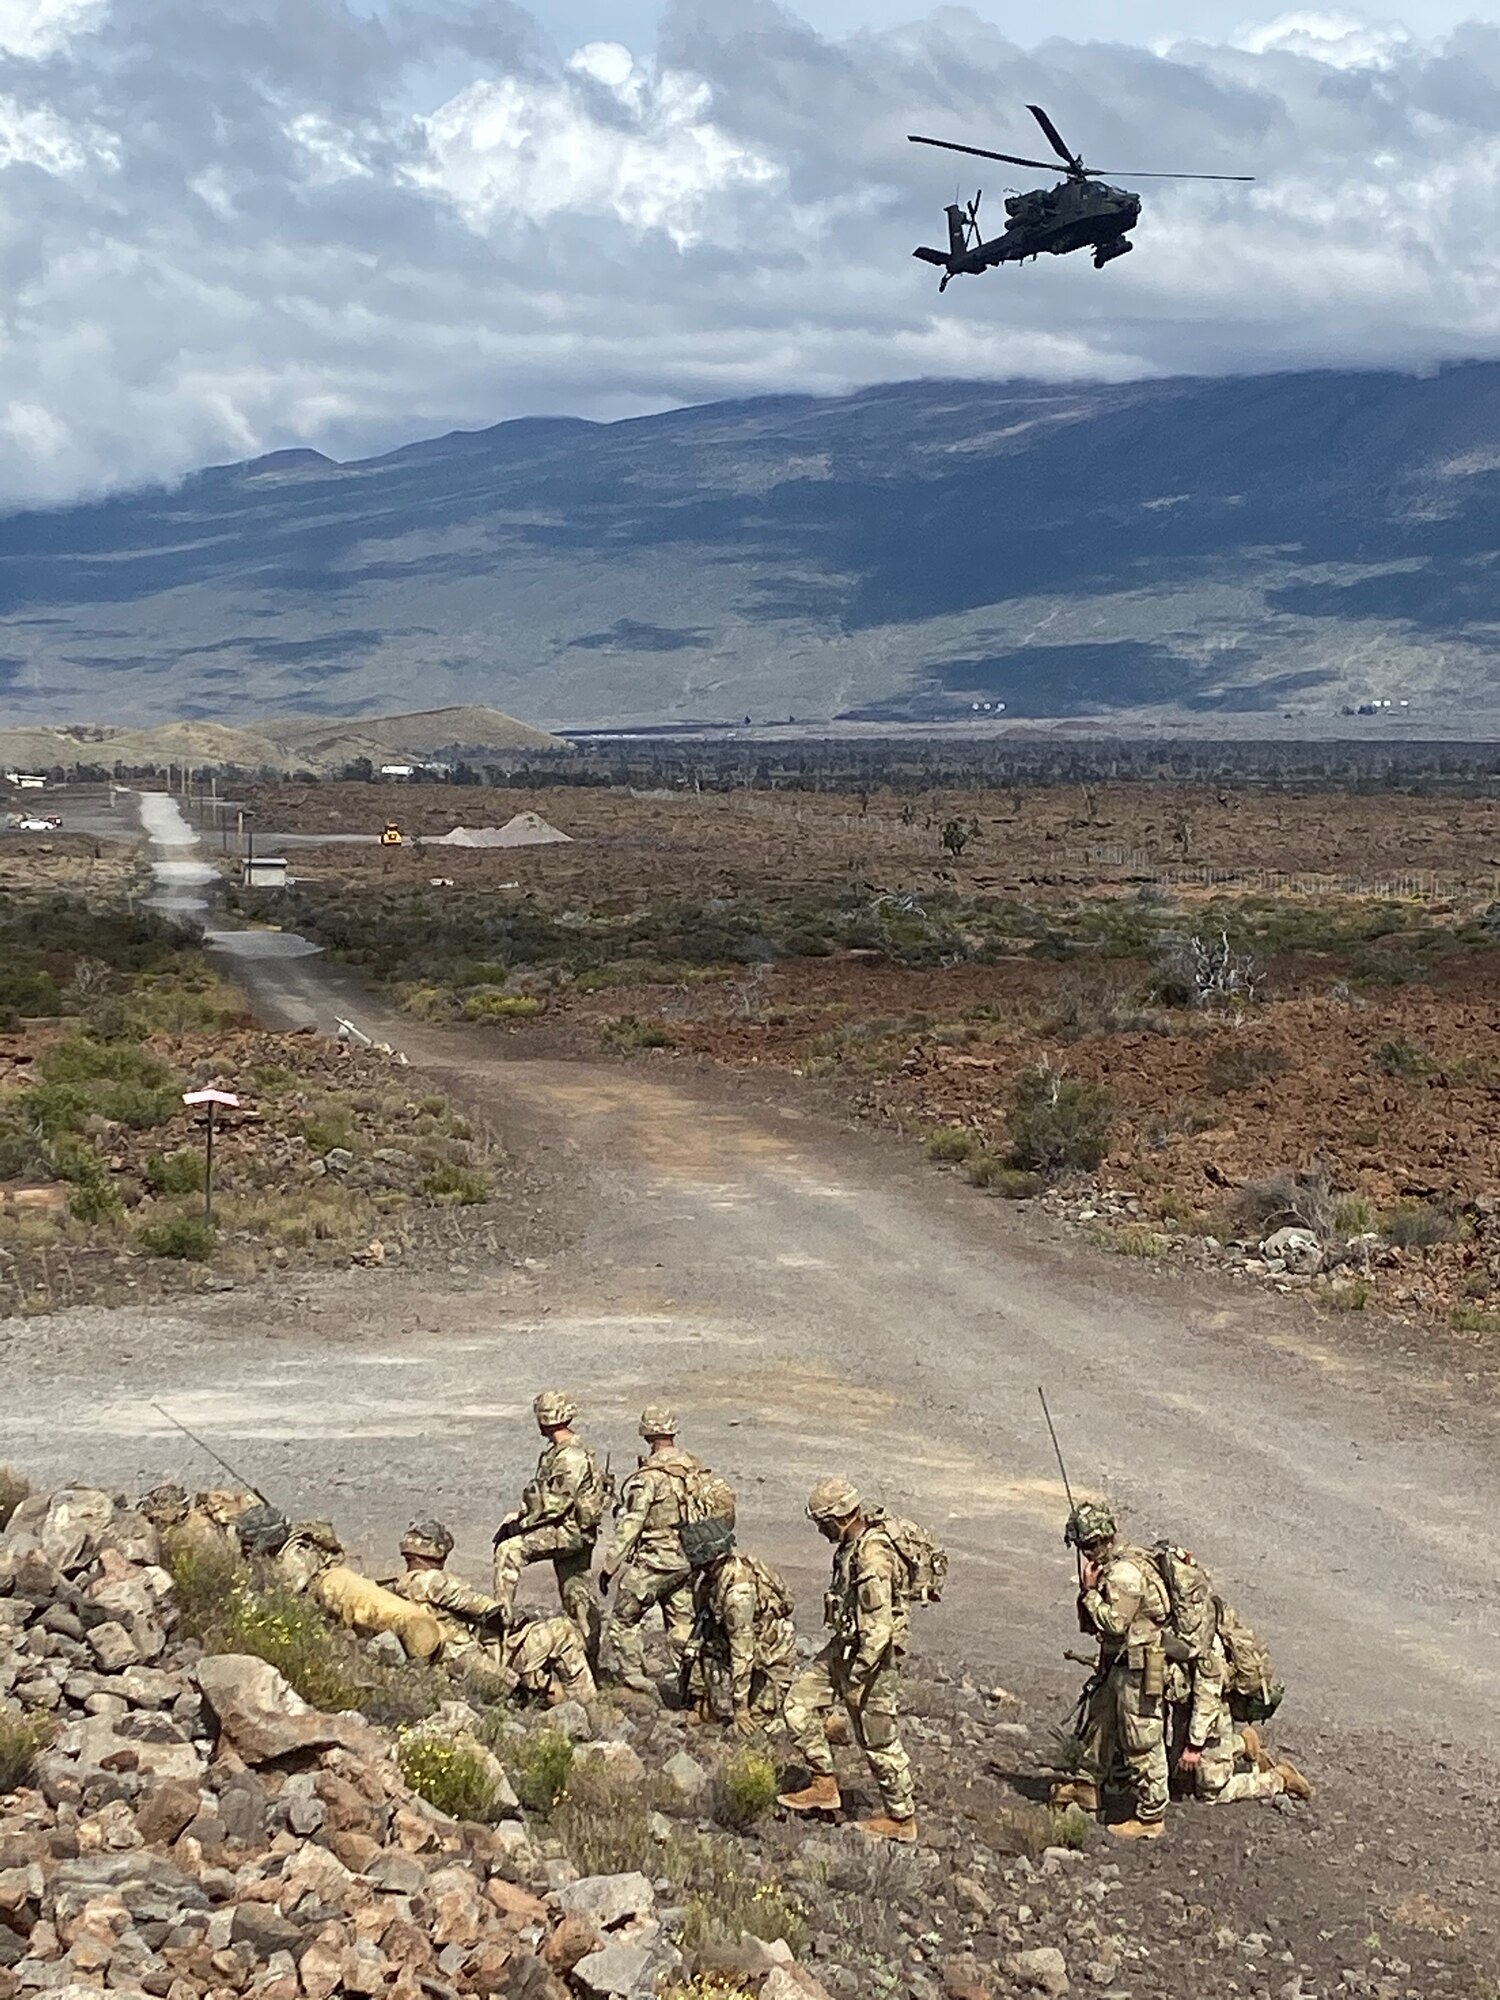 An AH-64 Apache provides armed over watch for Alpha Company during infiltration operations for a Fire Support Coordination Exercise on Pohakuloa Training Area, located on the big island of Hawaii, November 12 through 21, 2019. During the exercise, members of the 25th Air Support Operations Squadron and U.S. Army Pacific 2nd Brigade, 25th Infantry Division, 2nd Brigade Combat Team, integrated with B-52 Stratofortress bombers for live-fire training missions in support of Indo-Pacific Command’s Continuous Bomber Presence operations. (Courtesy photo)